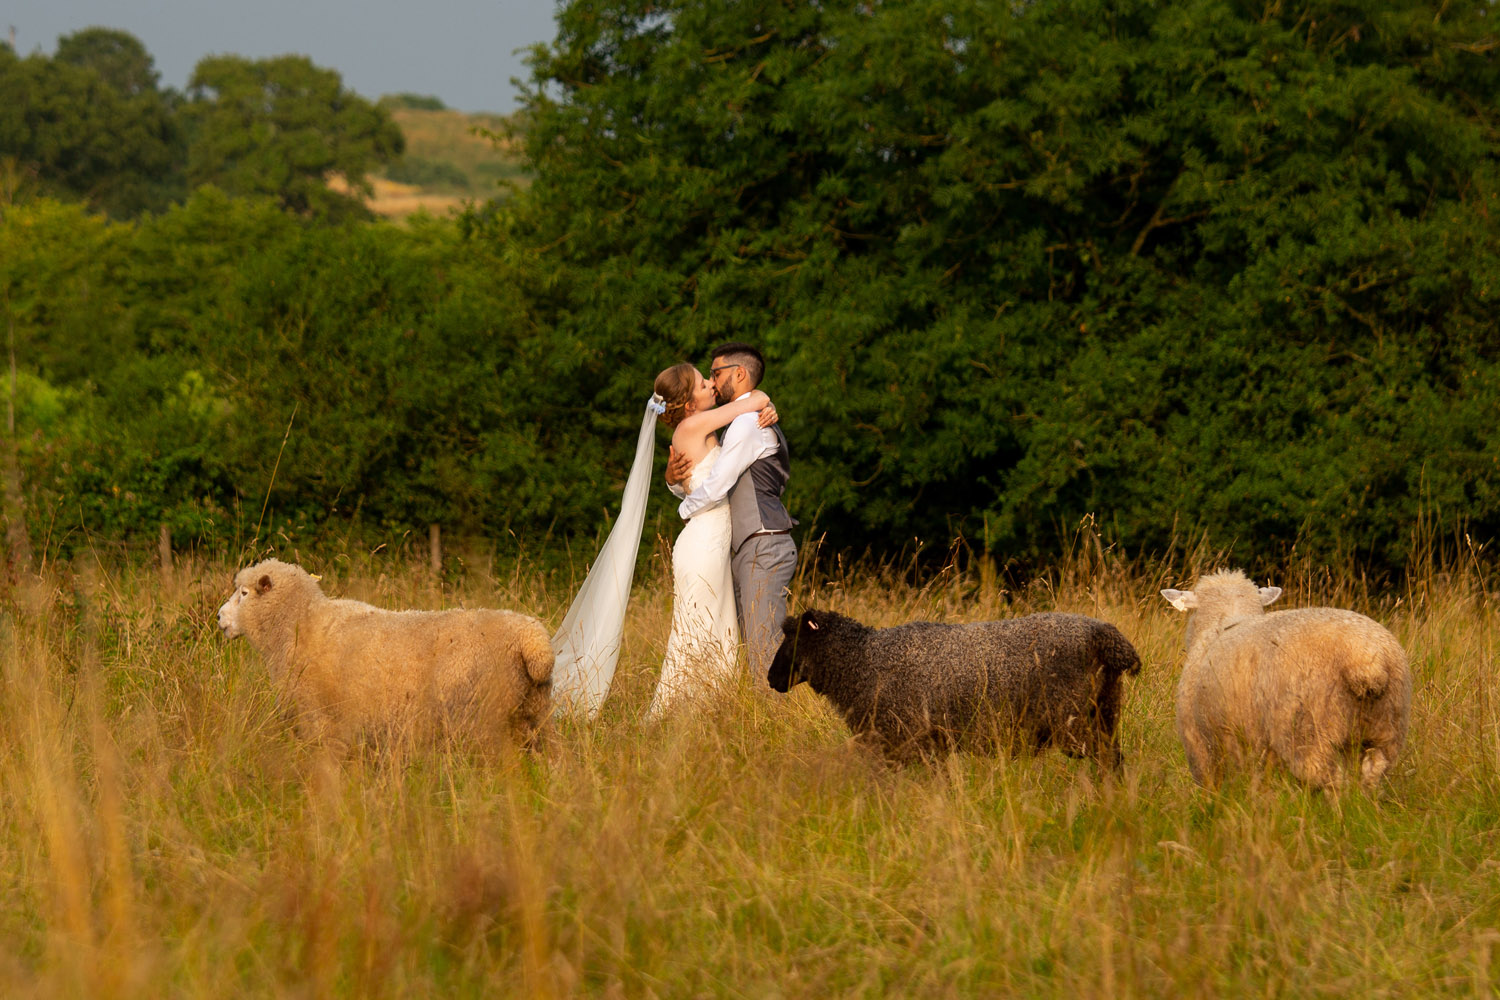 Golden hour wedding photography of a couple stood kissing in a field while sheep look bemused! Credit Somerset wedding photographer Martin Dabek